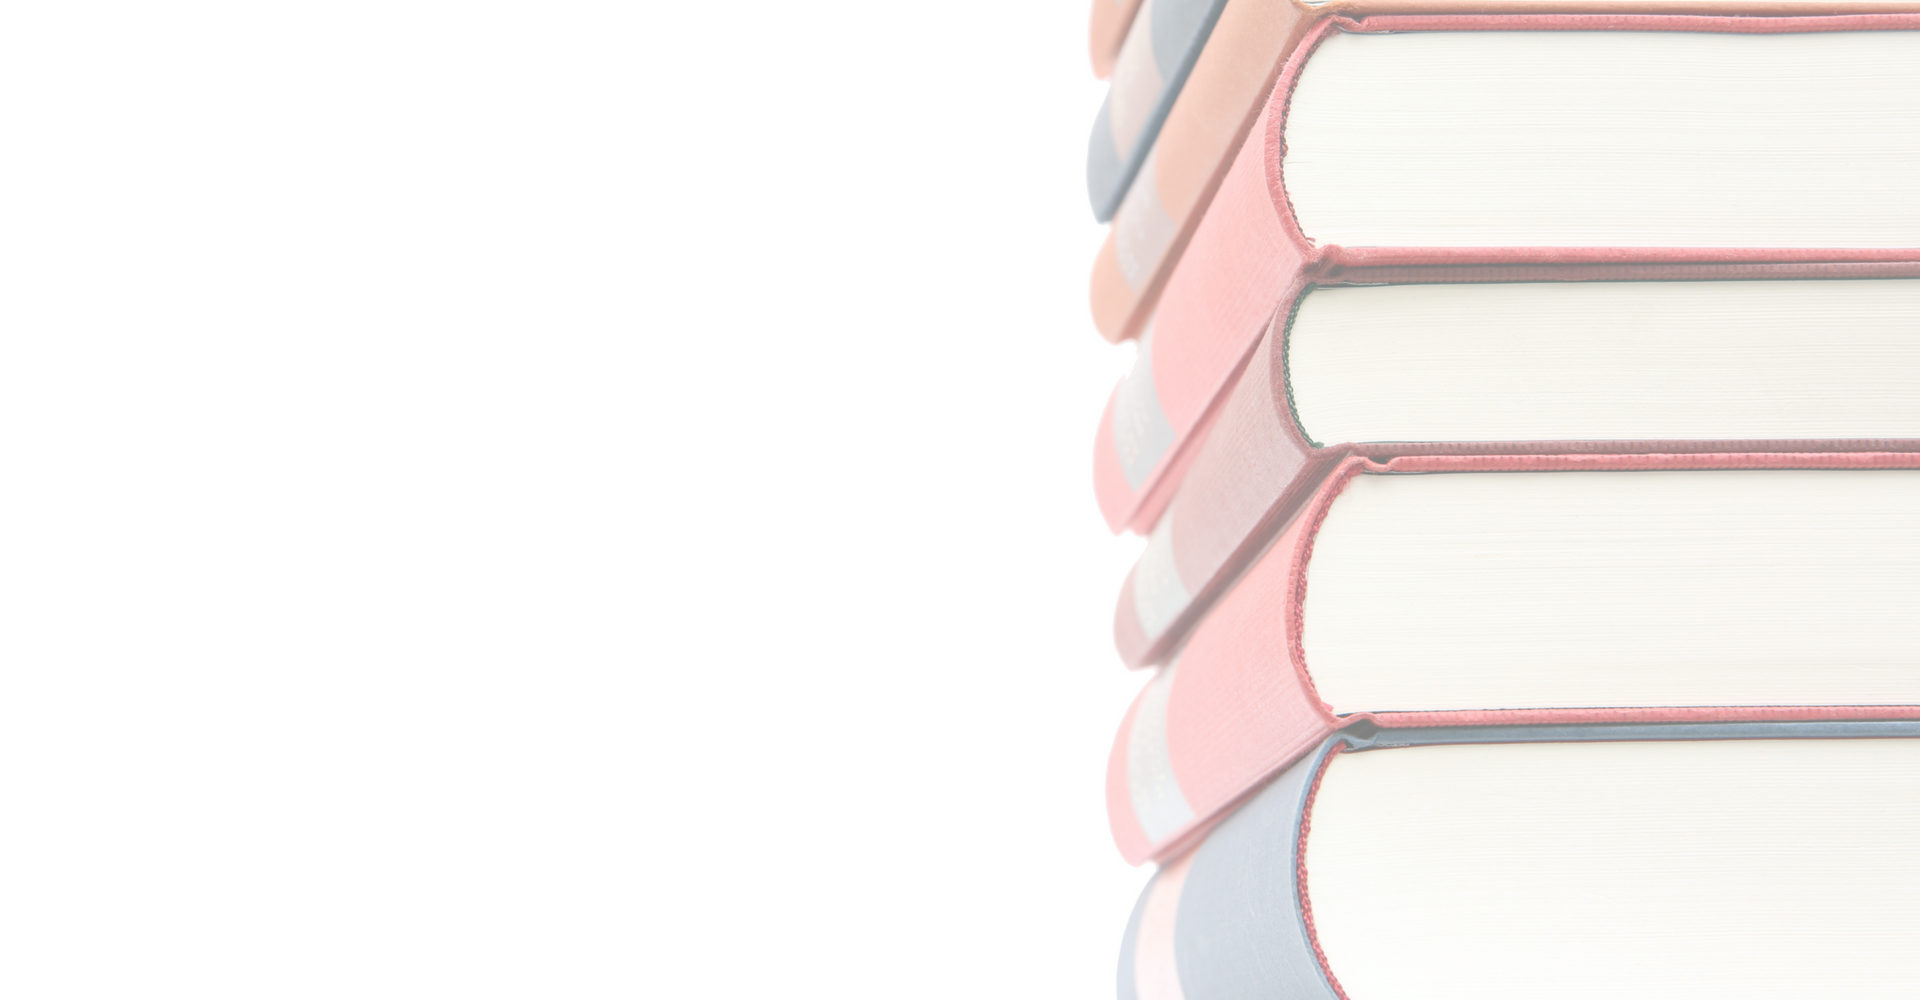 red-shoe-llc-stack-of-books-background-image